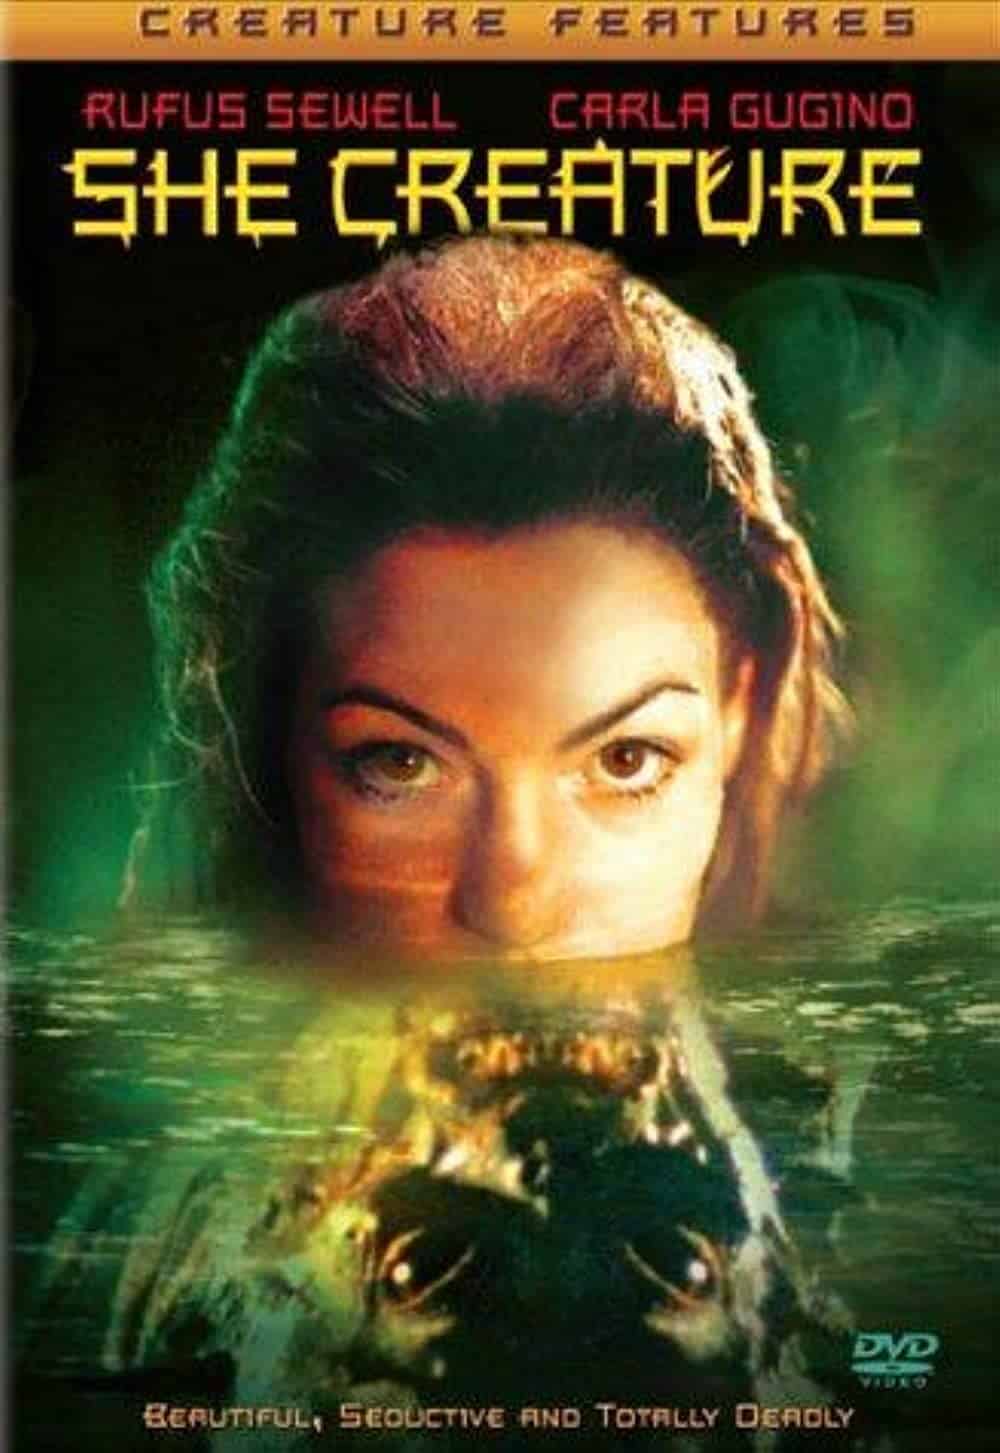 She-creature (2001) Best Mermaid Films To Check Out